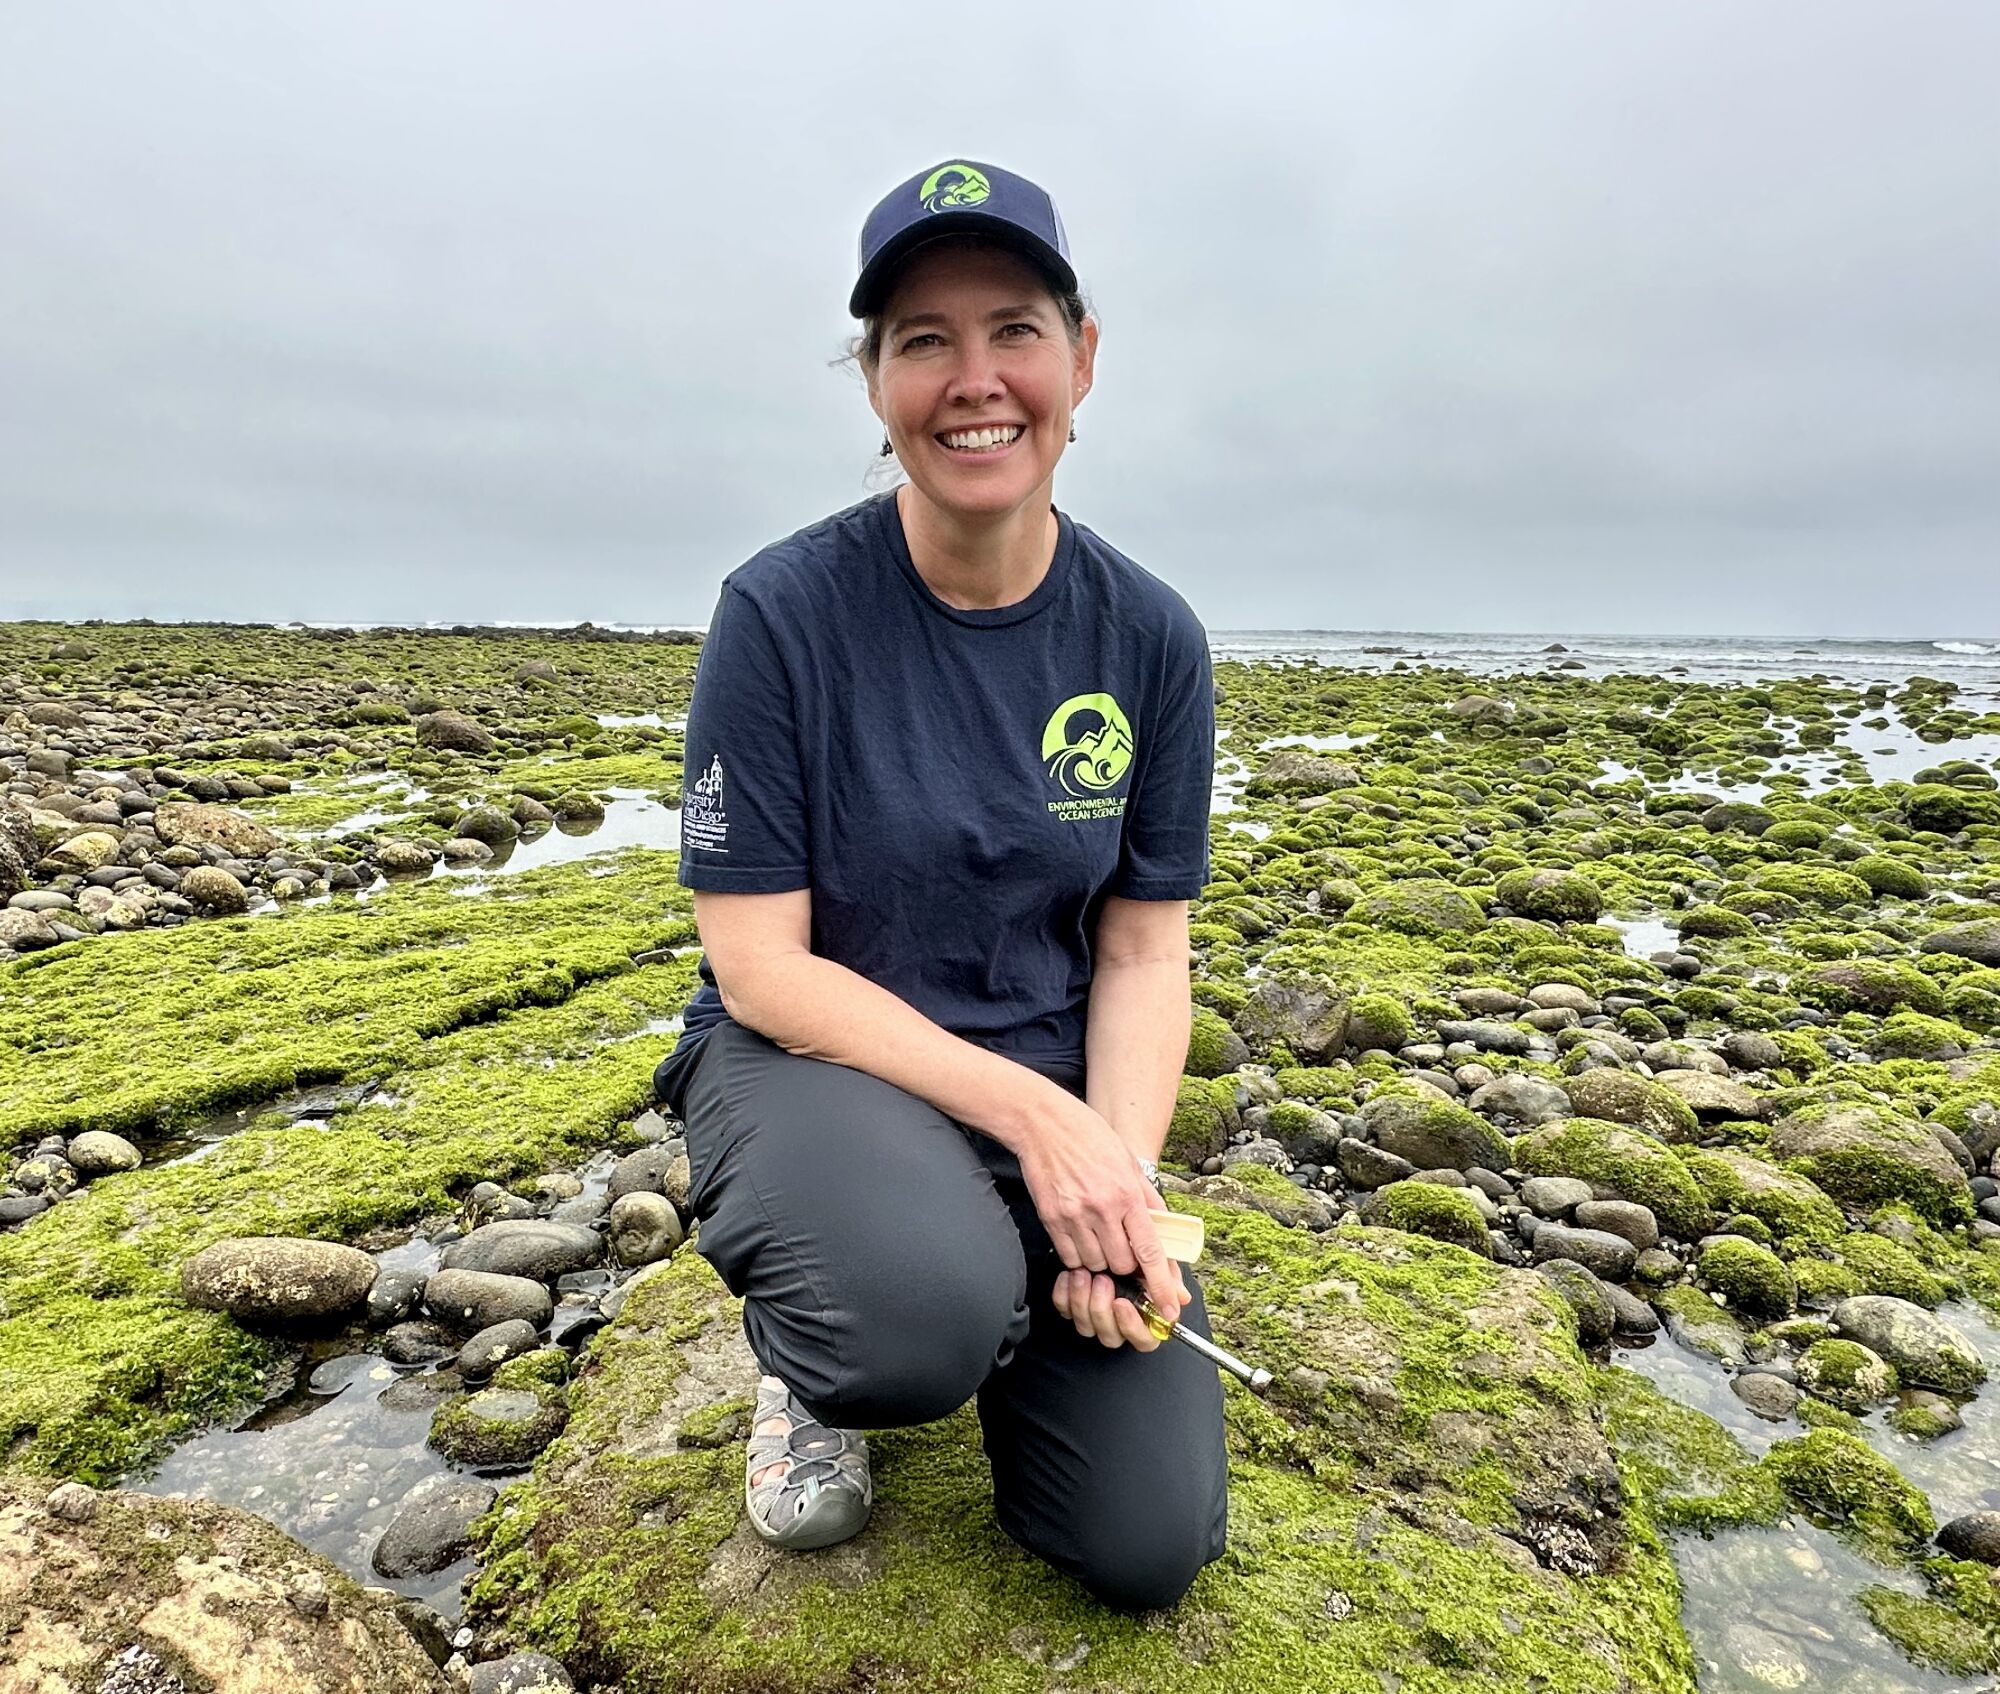 Nathalie Reyns of Point Loma Nazarene University studies the life cycle of barnacles at Bird Rock in La Jolla.